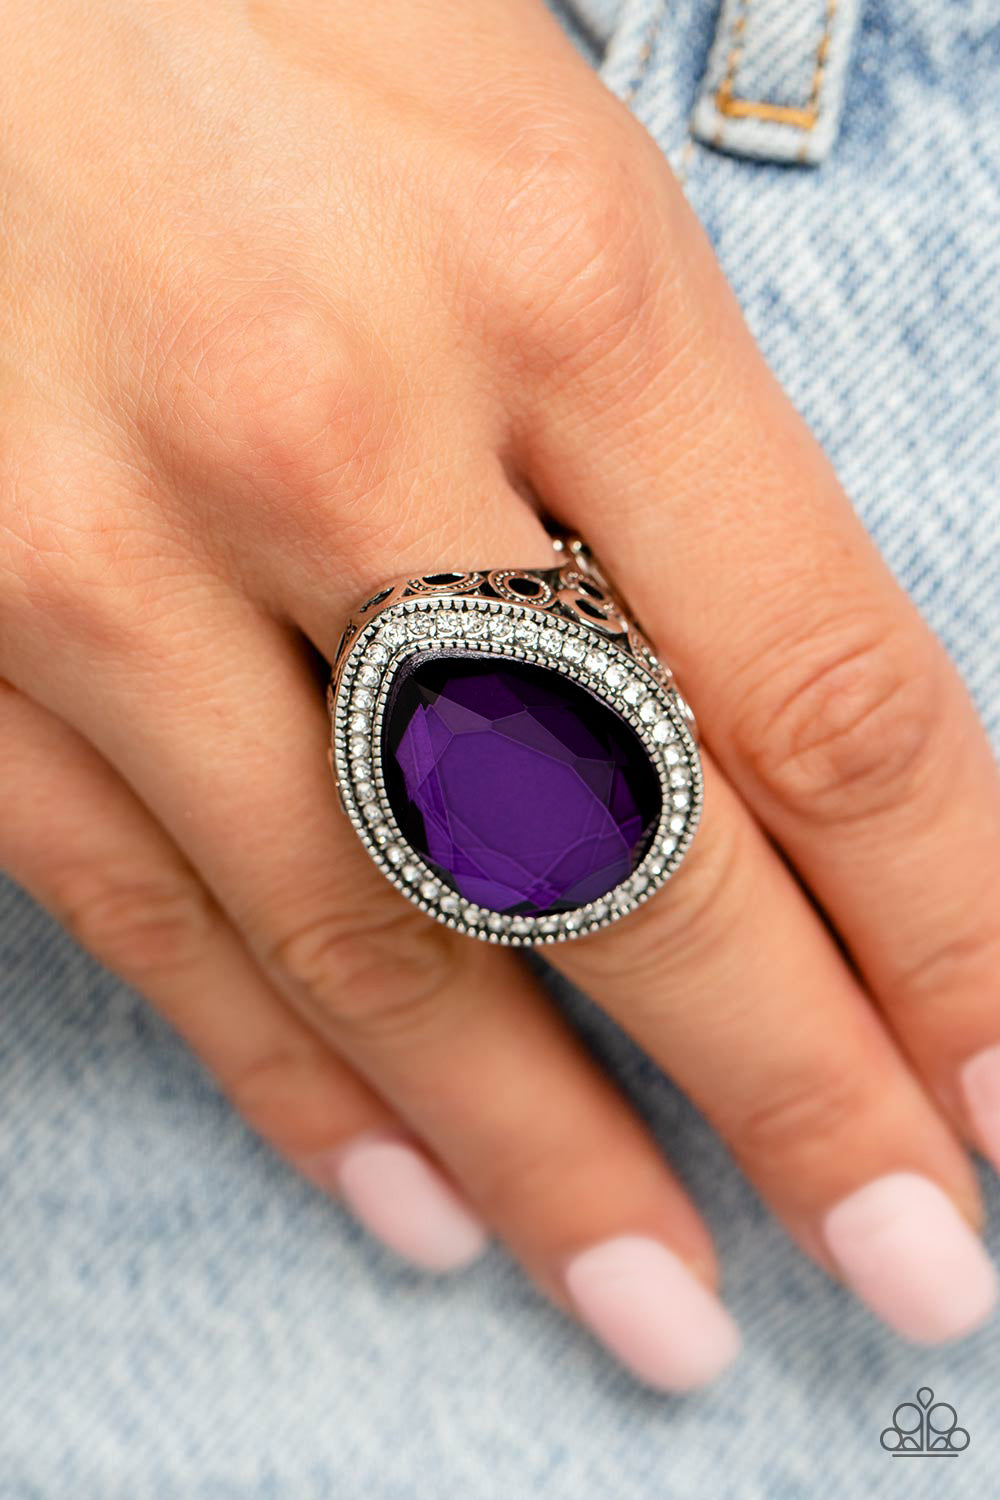 An oversized purple teardrop gem is nestled inside a silver teardrop frame encrusted in dainty white rhinestones. Airy teardrop cutouts decorate each side of the oversized frame, some with subtle texture and others with a high sheen finish. Features a stretchy band for a flexible fit.